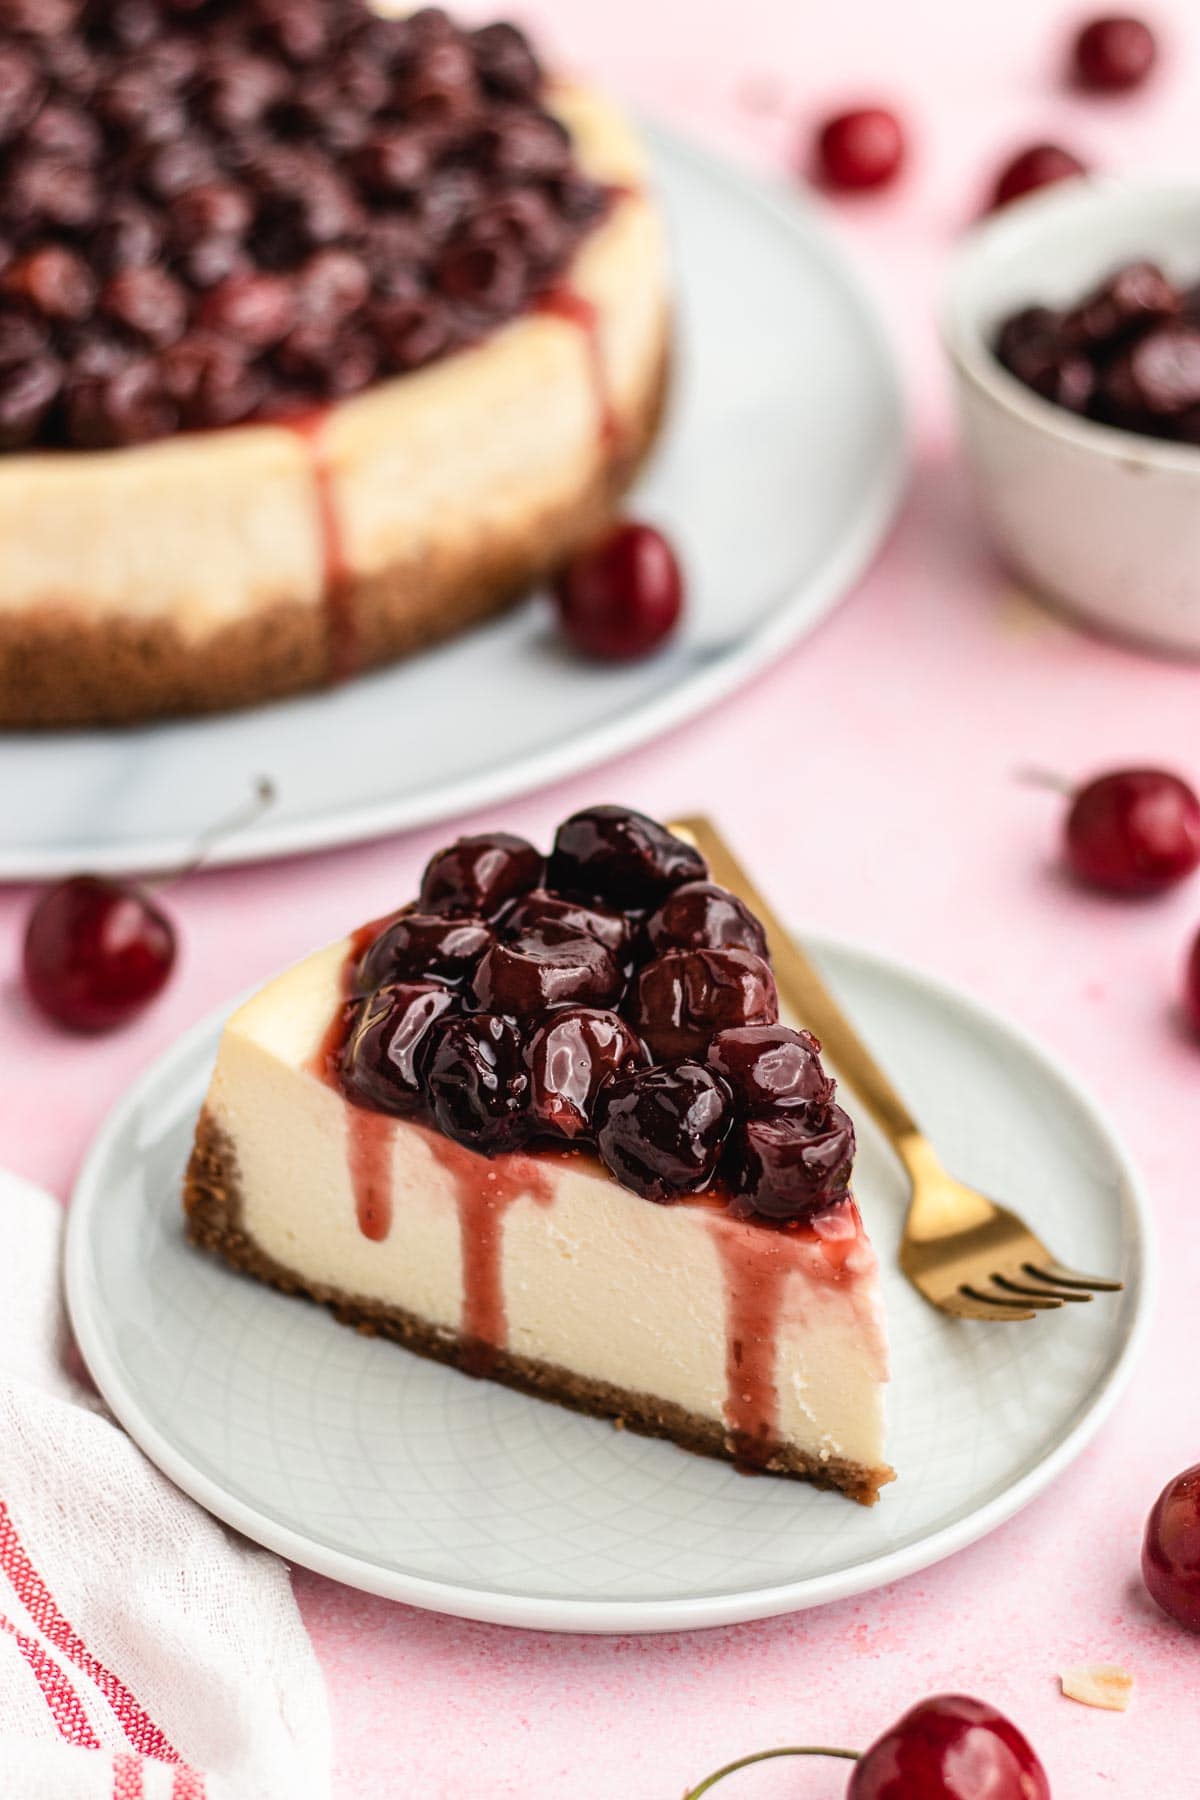 Cherry Cheesecake slice on plate with fork and cheesecake in background